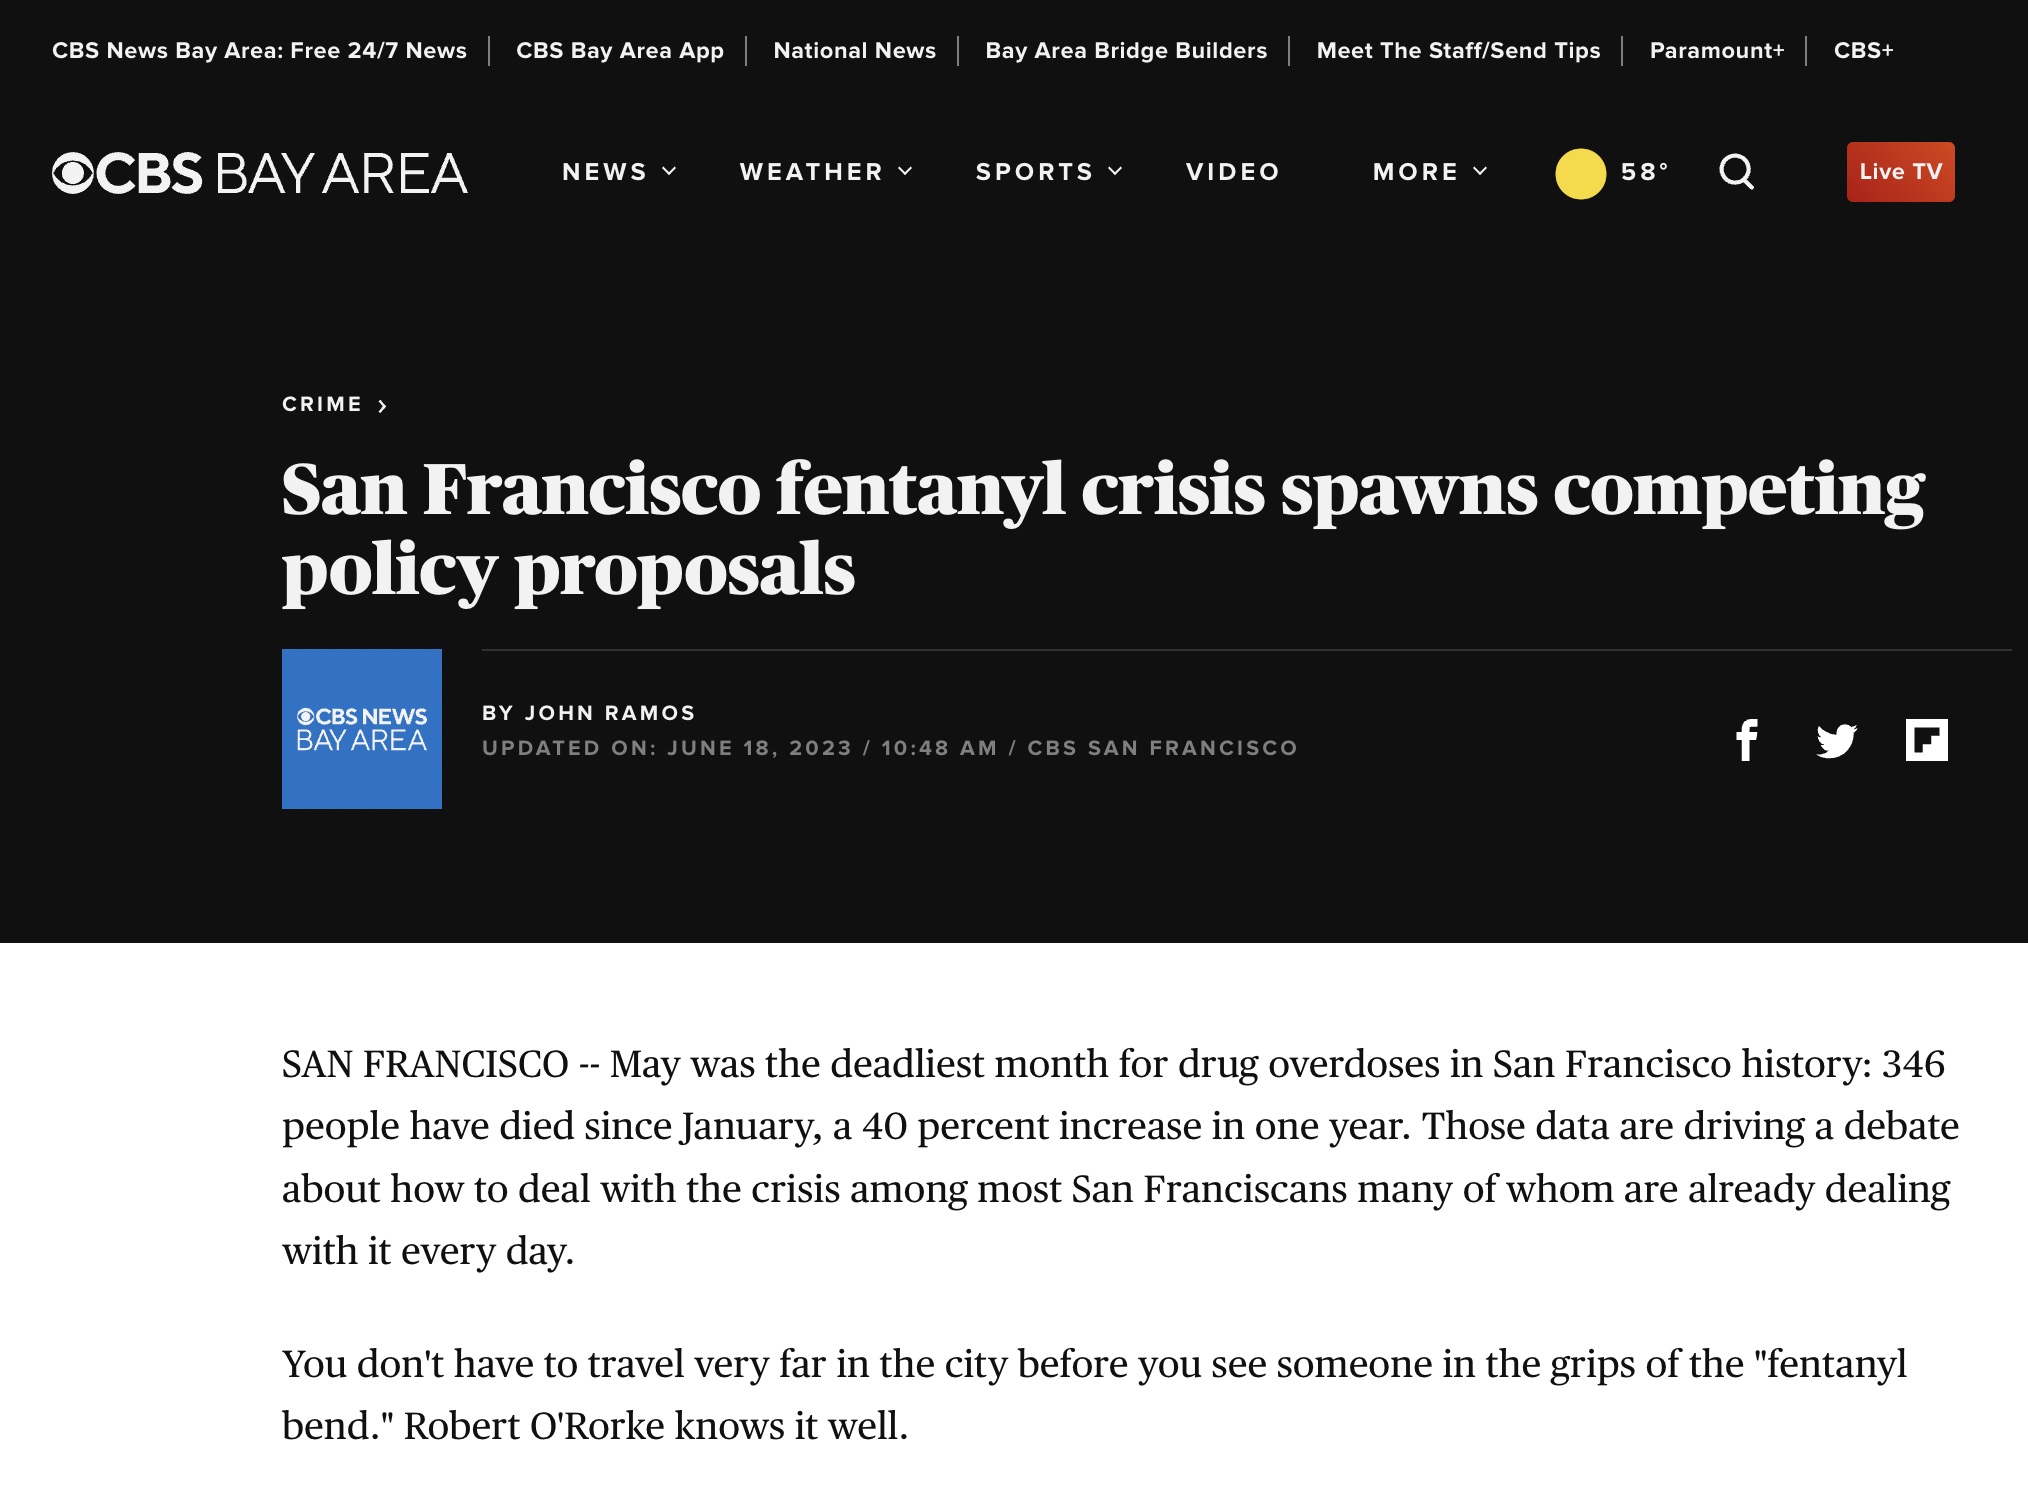 CBS News Bay Area Article: San Francisco fentanyl crisis spawns competing policy proposals